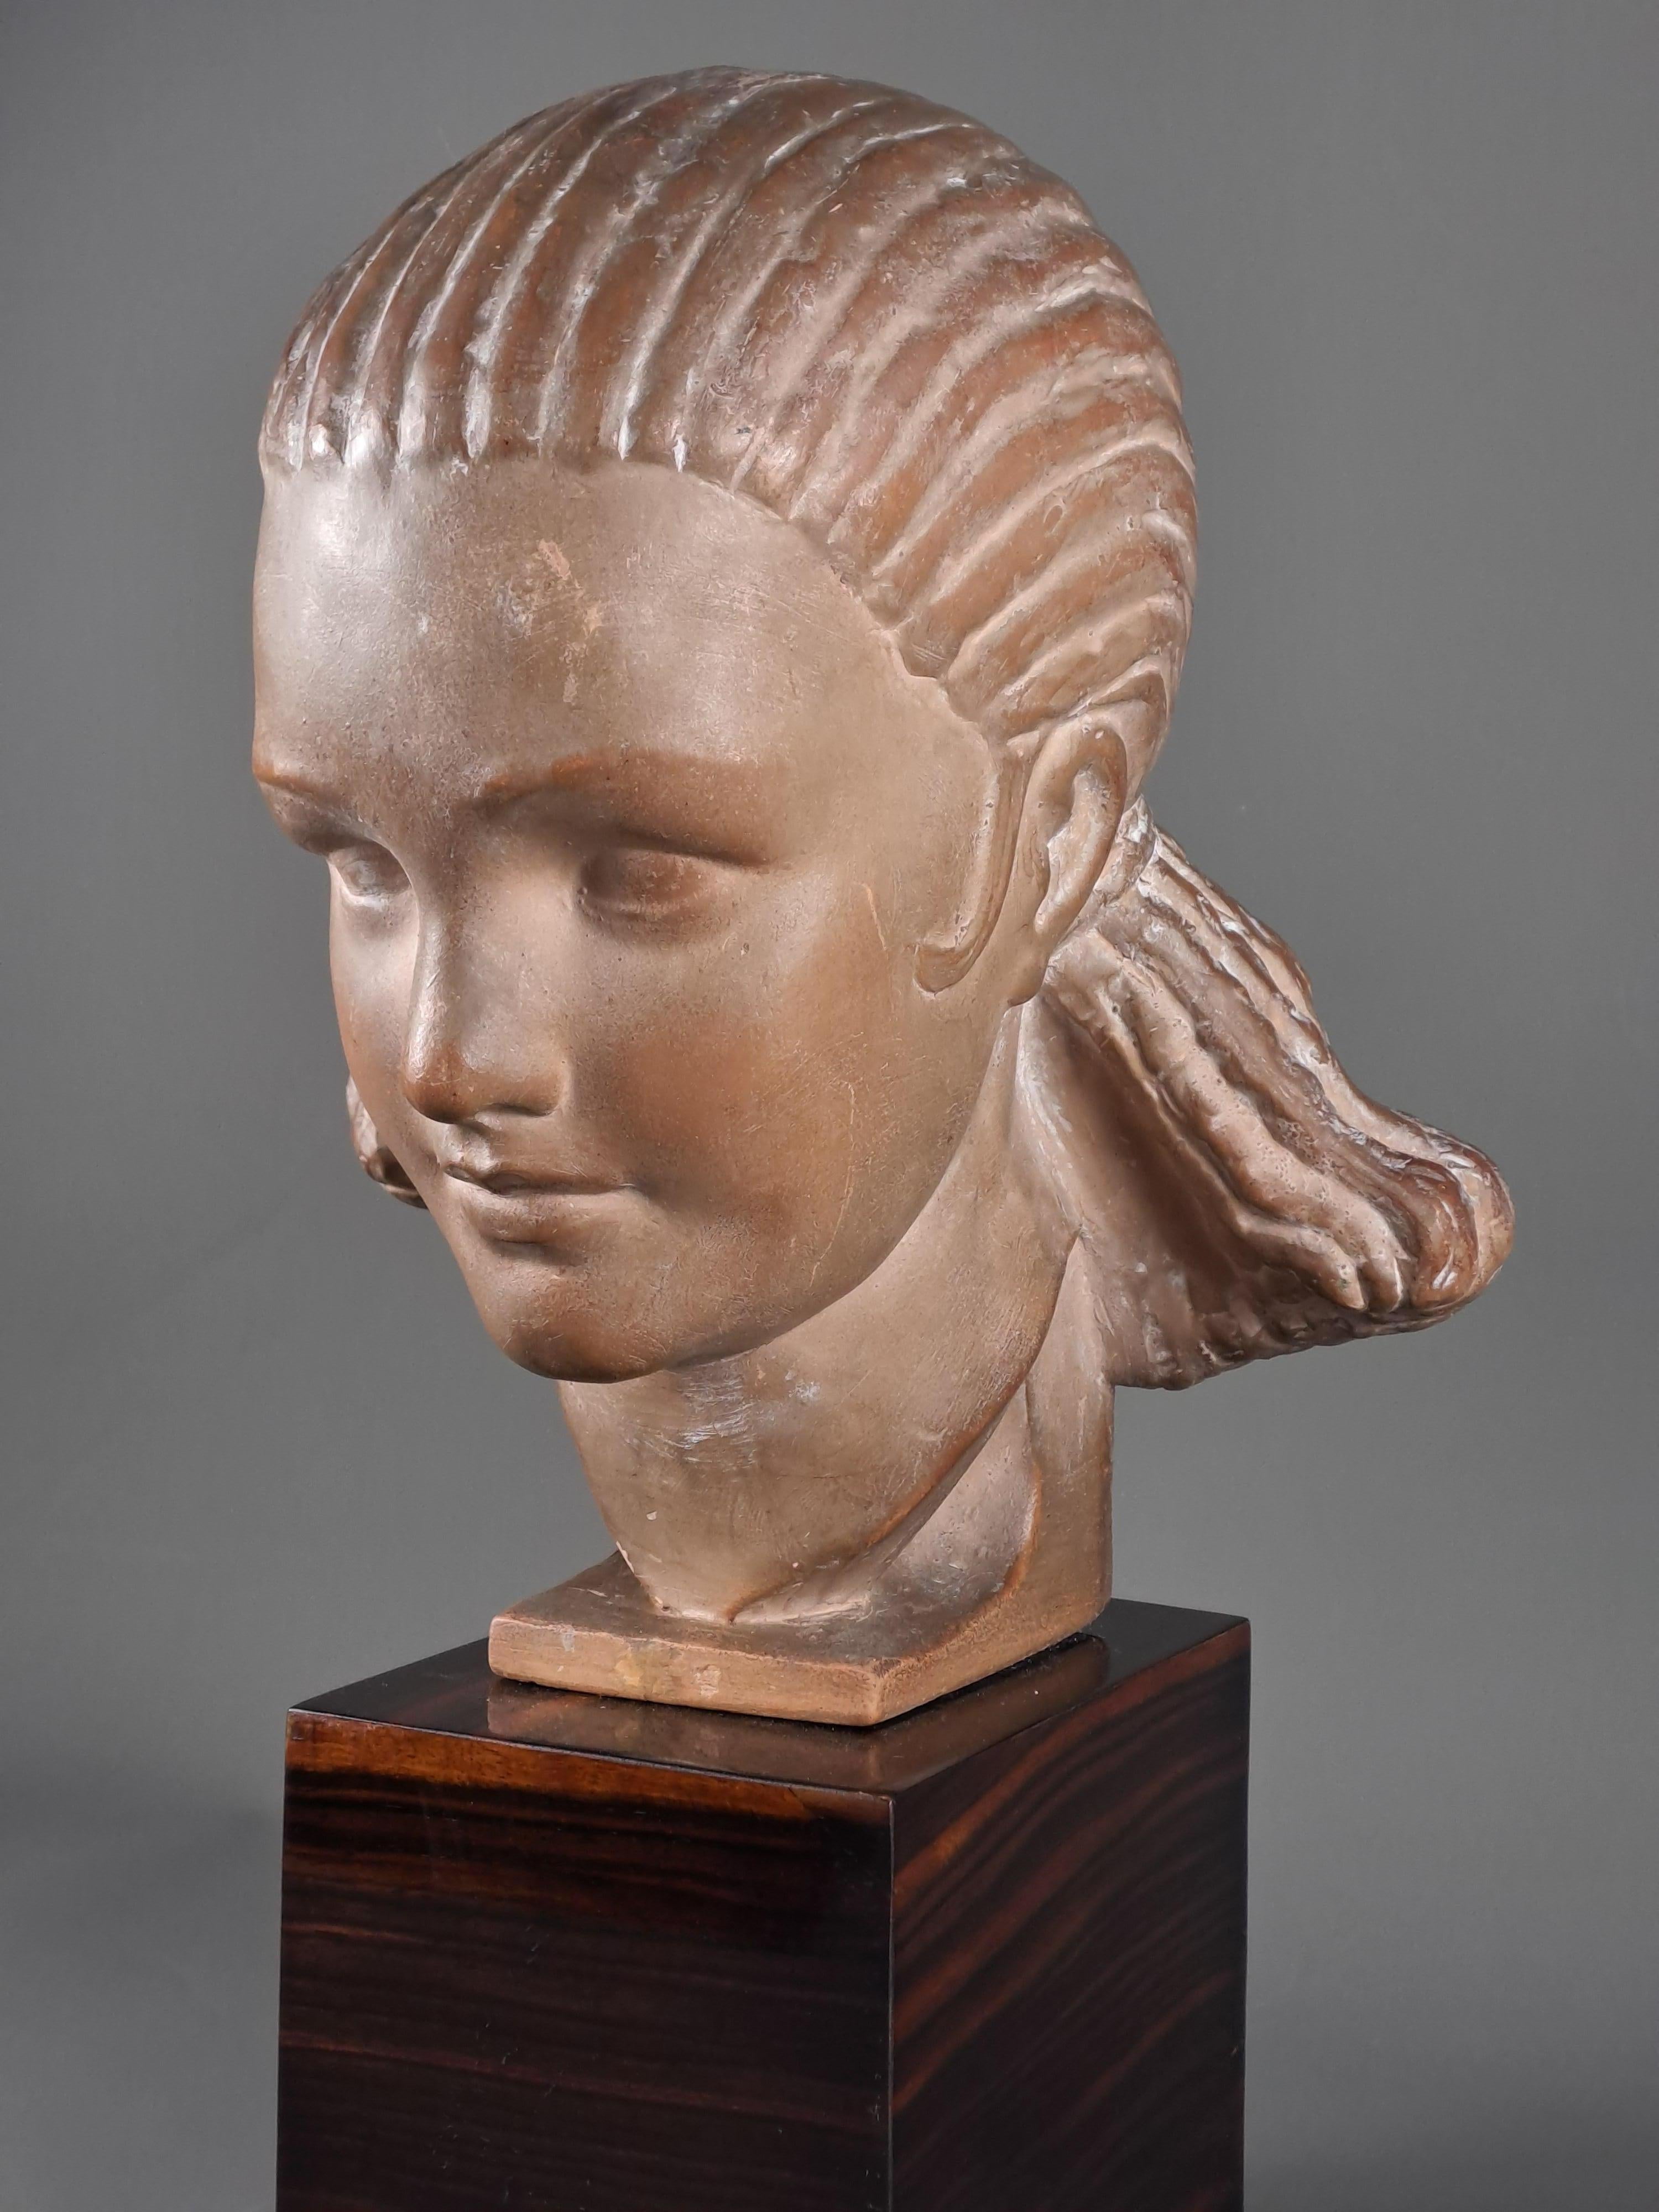 Marcel Bouraine (1886–1948)

Terracotta sculpture depicting the bust of a beautiful young woman with very fine features and a hairstyle made up of fine braids pulled back and held in a sort of large flared bun.

Art deco composition, reminiscent of